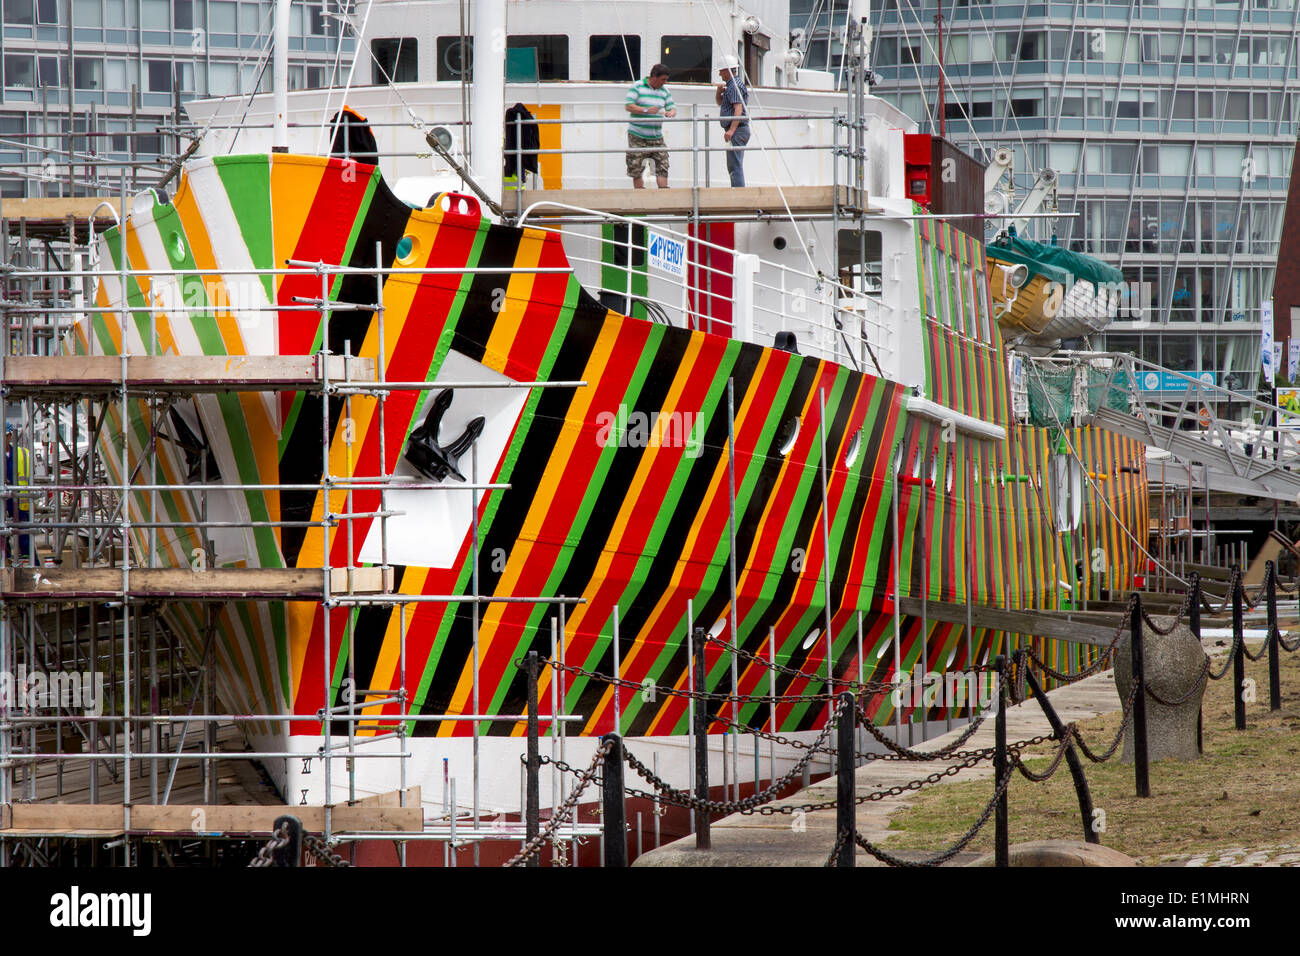 Liverpool pilot cutter number 2, 1953 the Edmund Gardner is being transformed by camouflaged red, black, orange & green stripes,‘razzle dazzle’ painted wartime design. Renowned biennial artist Carlos Cruz-Diez has been commissioned to work with  “dazzle” camouflage using an historic pilot ship owned and conserved by Merseyside Maritime Museum. The ship, which is situated in dry dock adjacent to Liverpool’s Albert Dock is being painted by the Cammell Laird team to realise the wartime design. Stock Photo